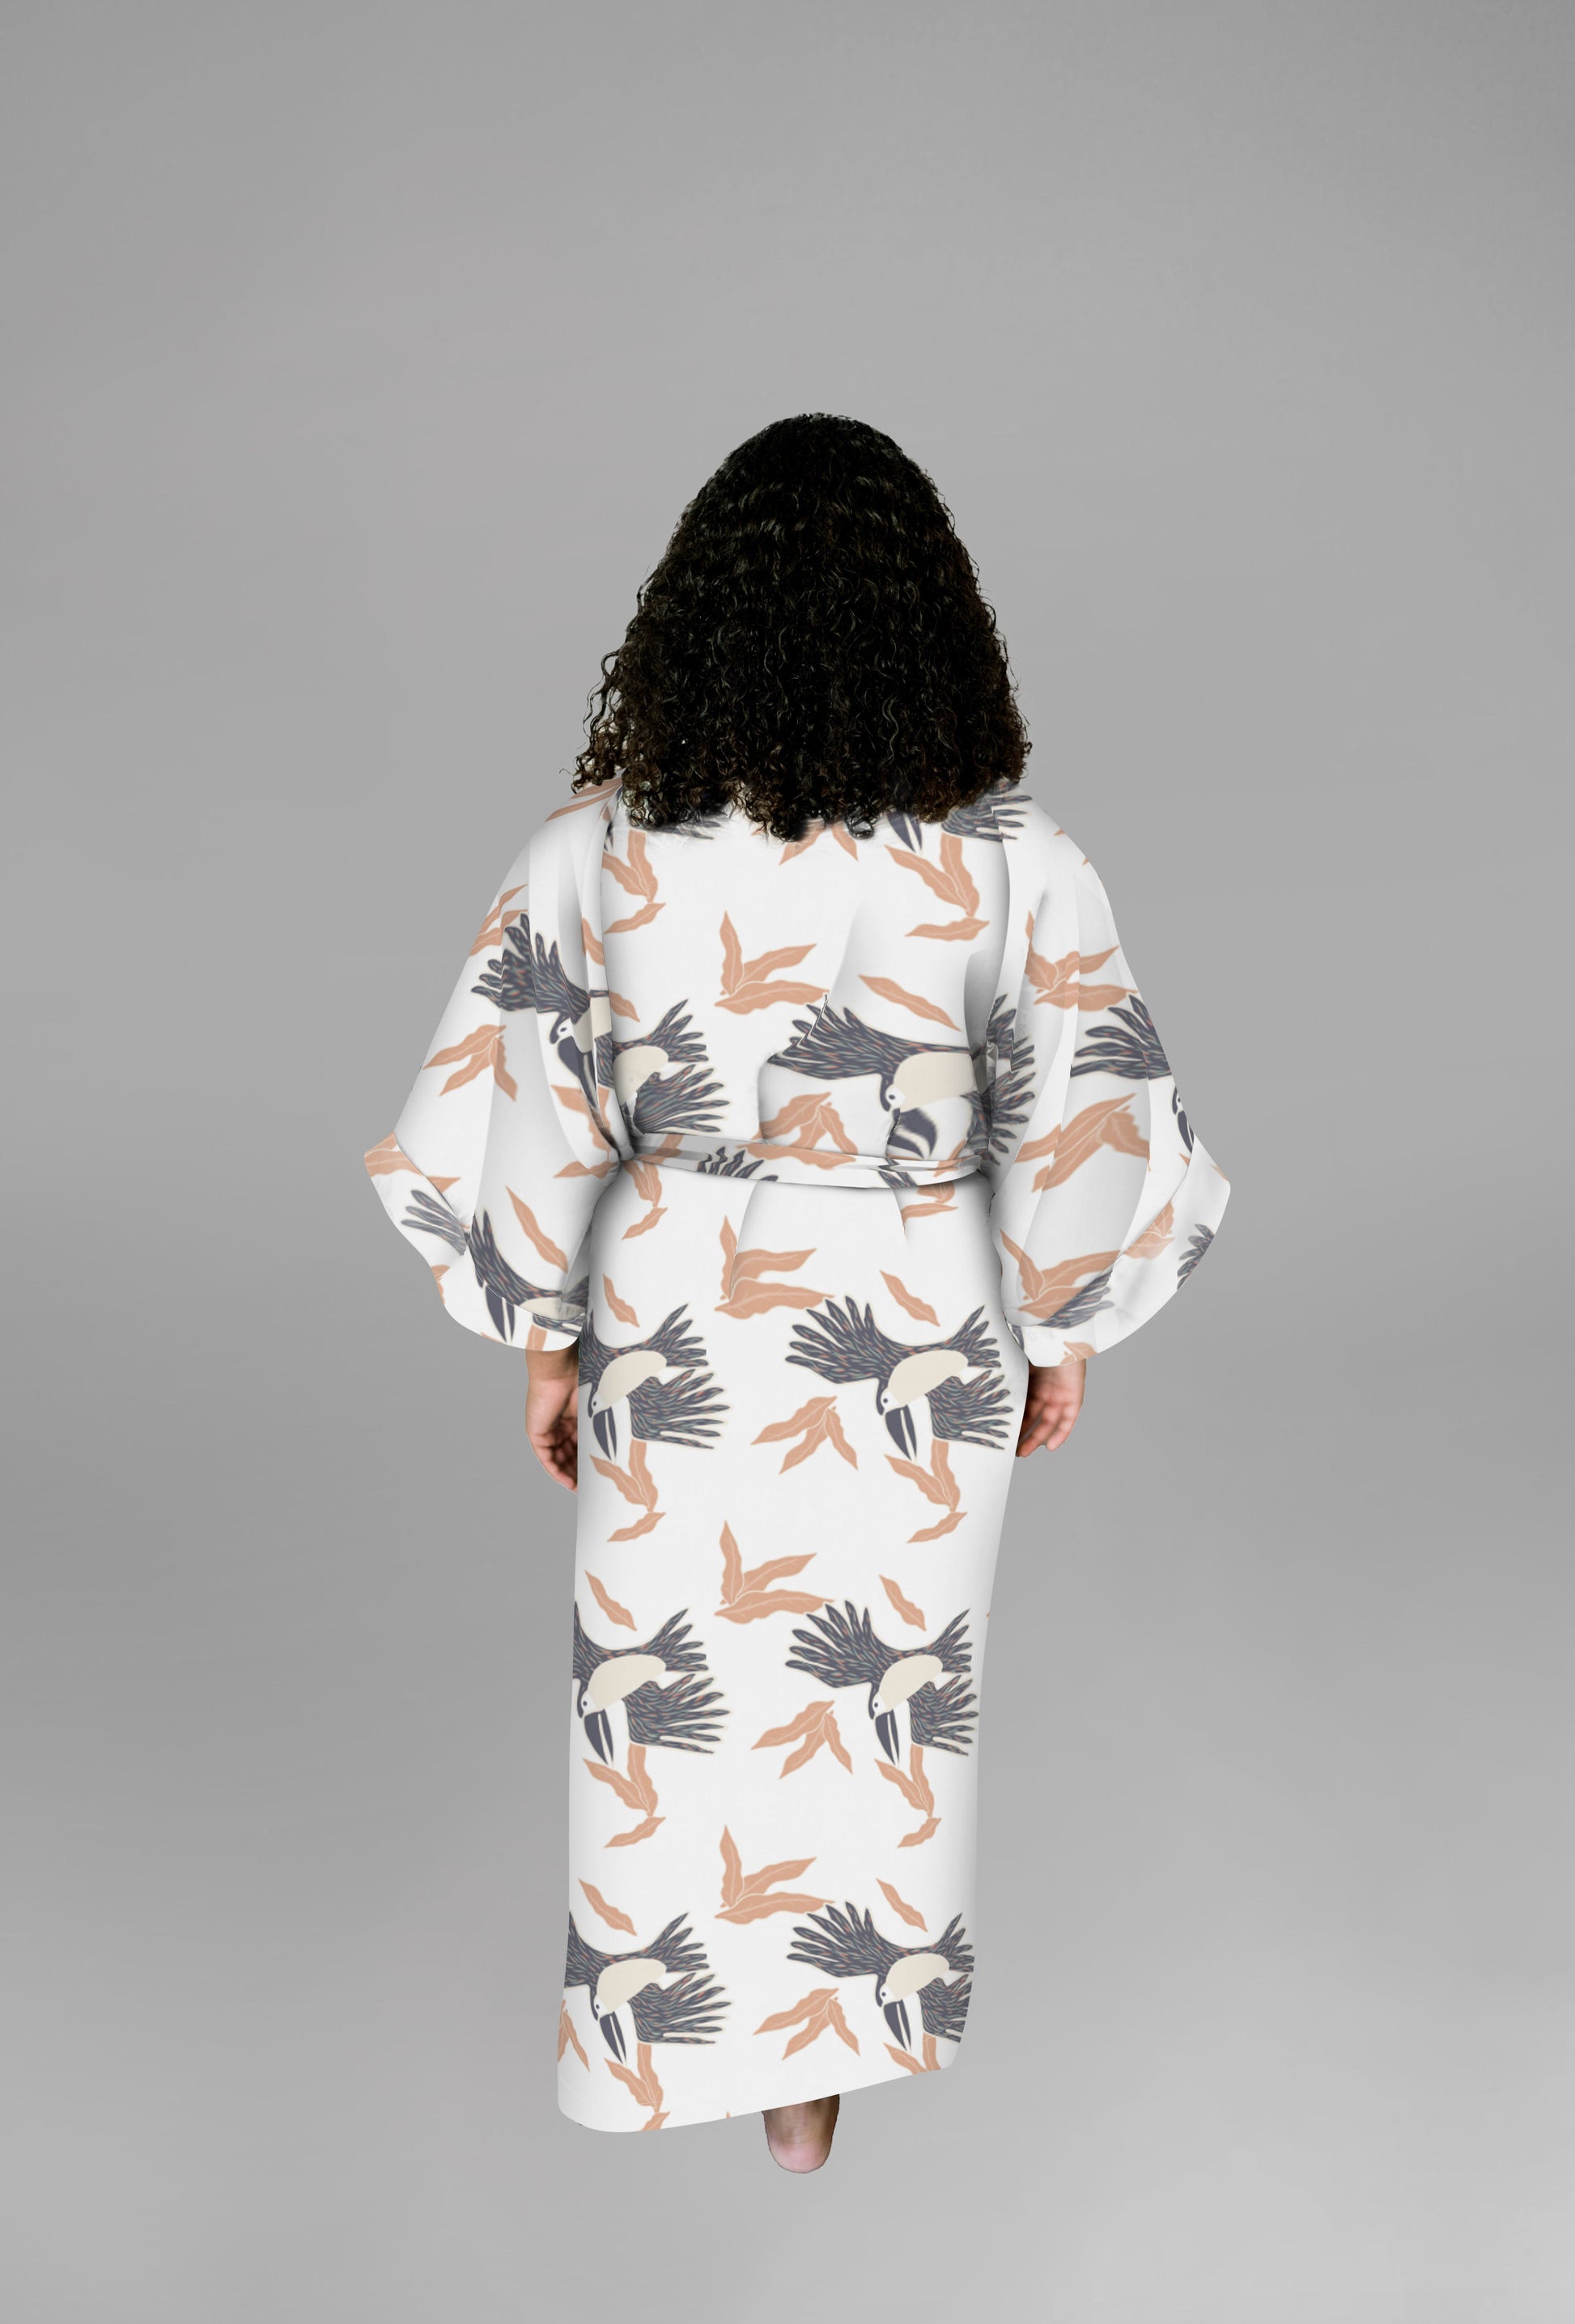 Woman wearing kimono robe in White Toucans back profile view hands at her side